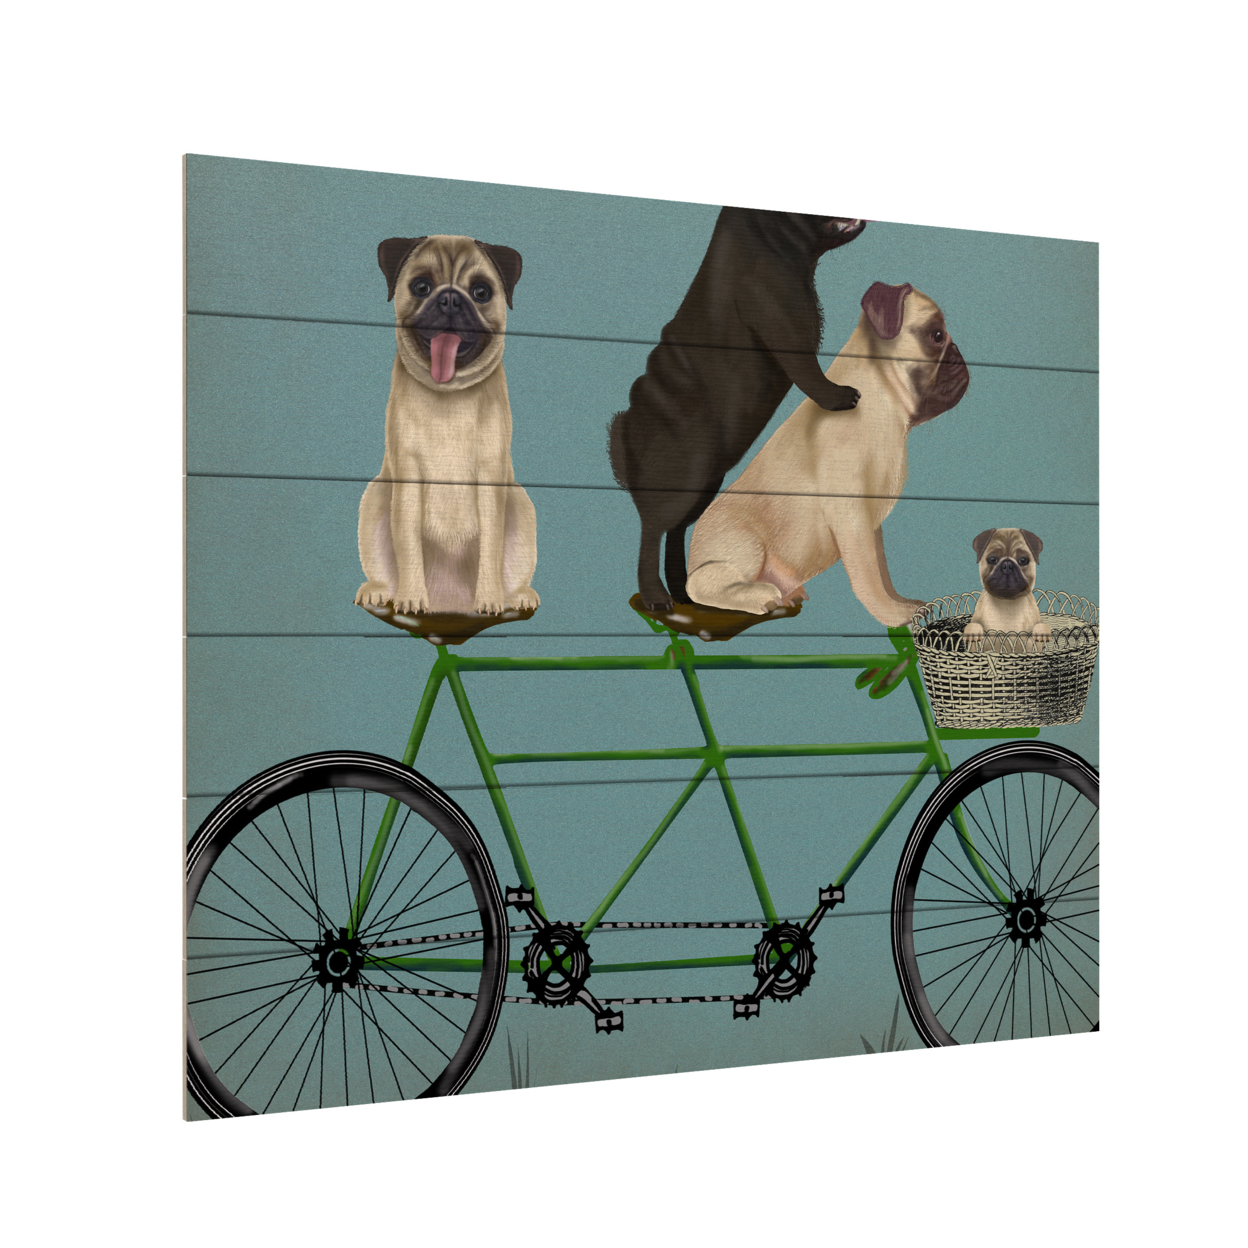 Wooden Slat Art 18 X 22 Inches Titled Pug Tandem Ready To Hang Home Decor Picture